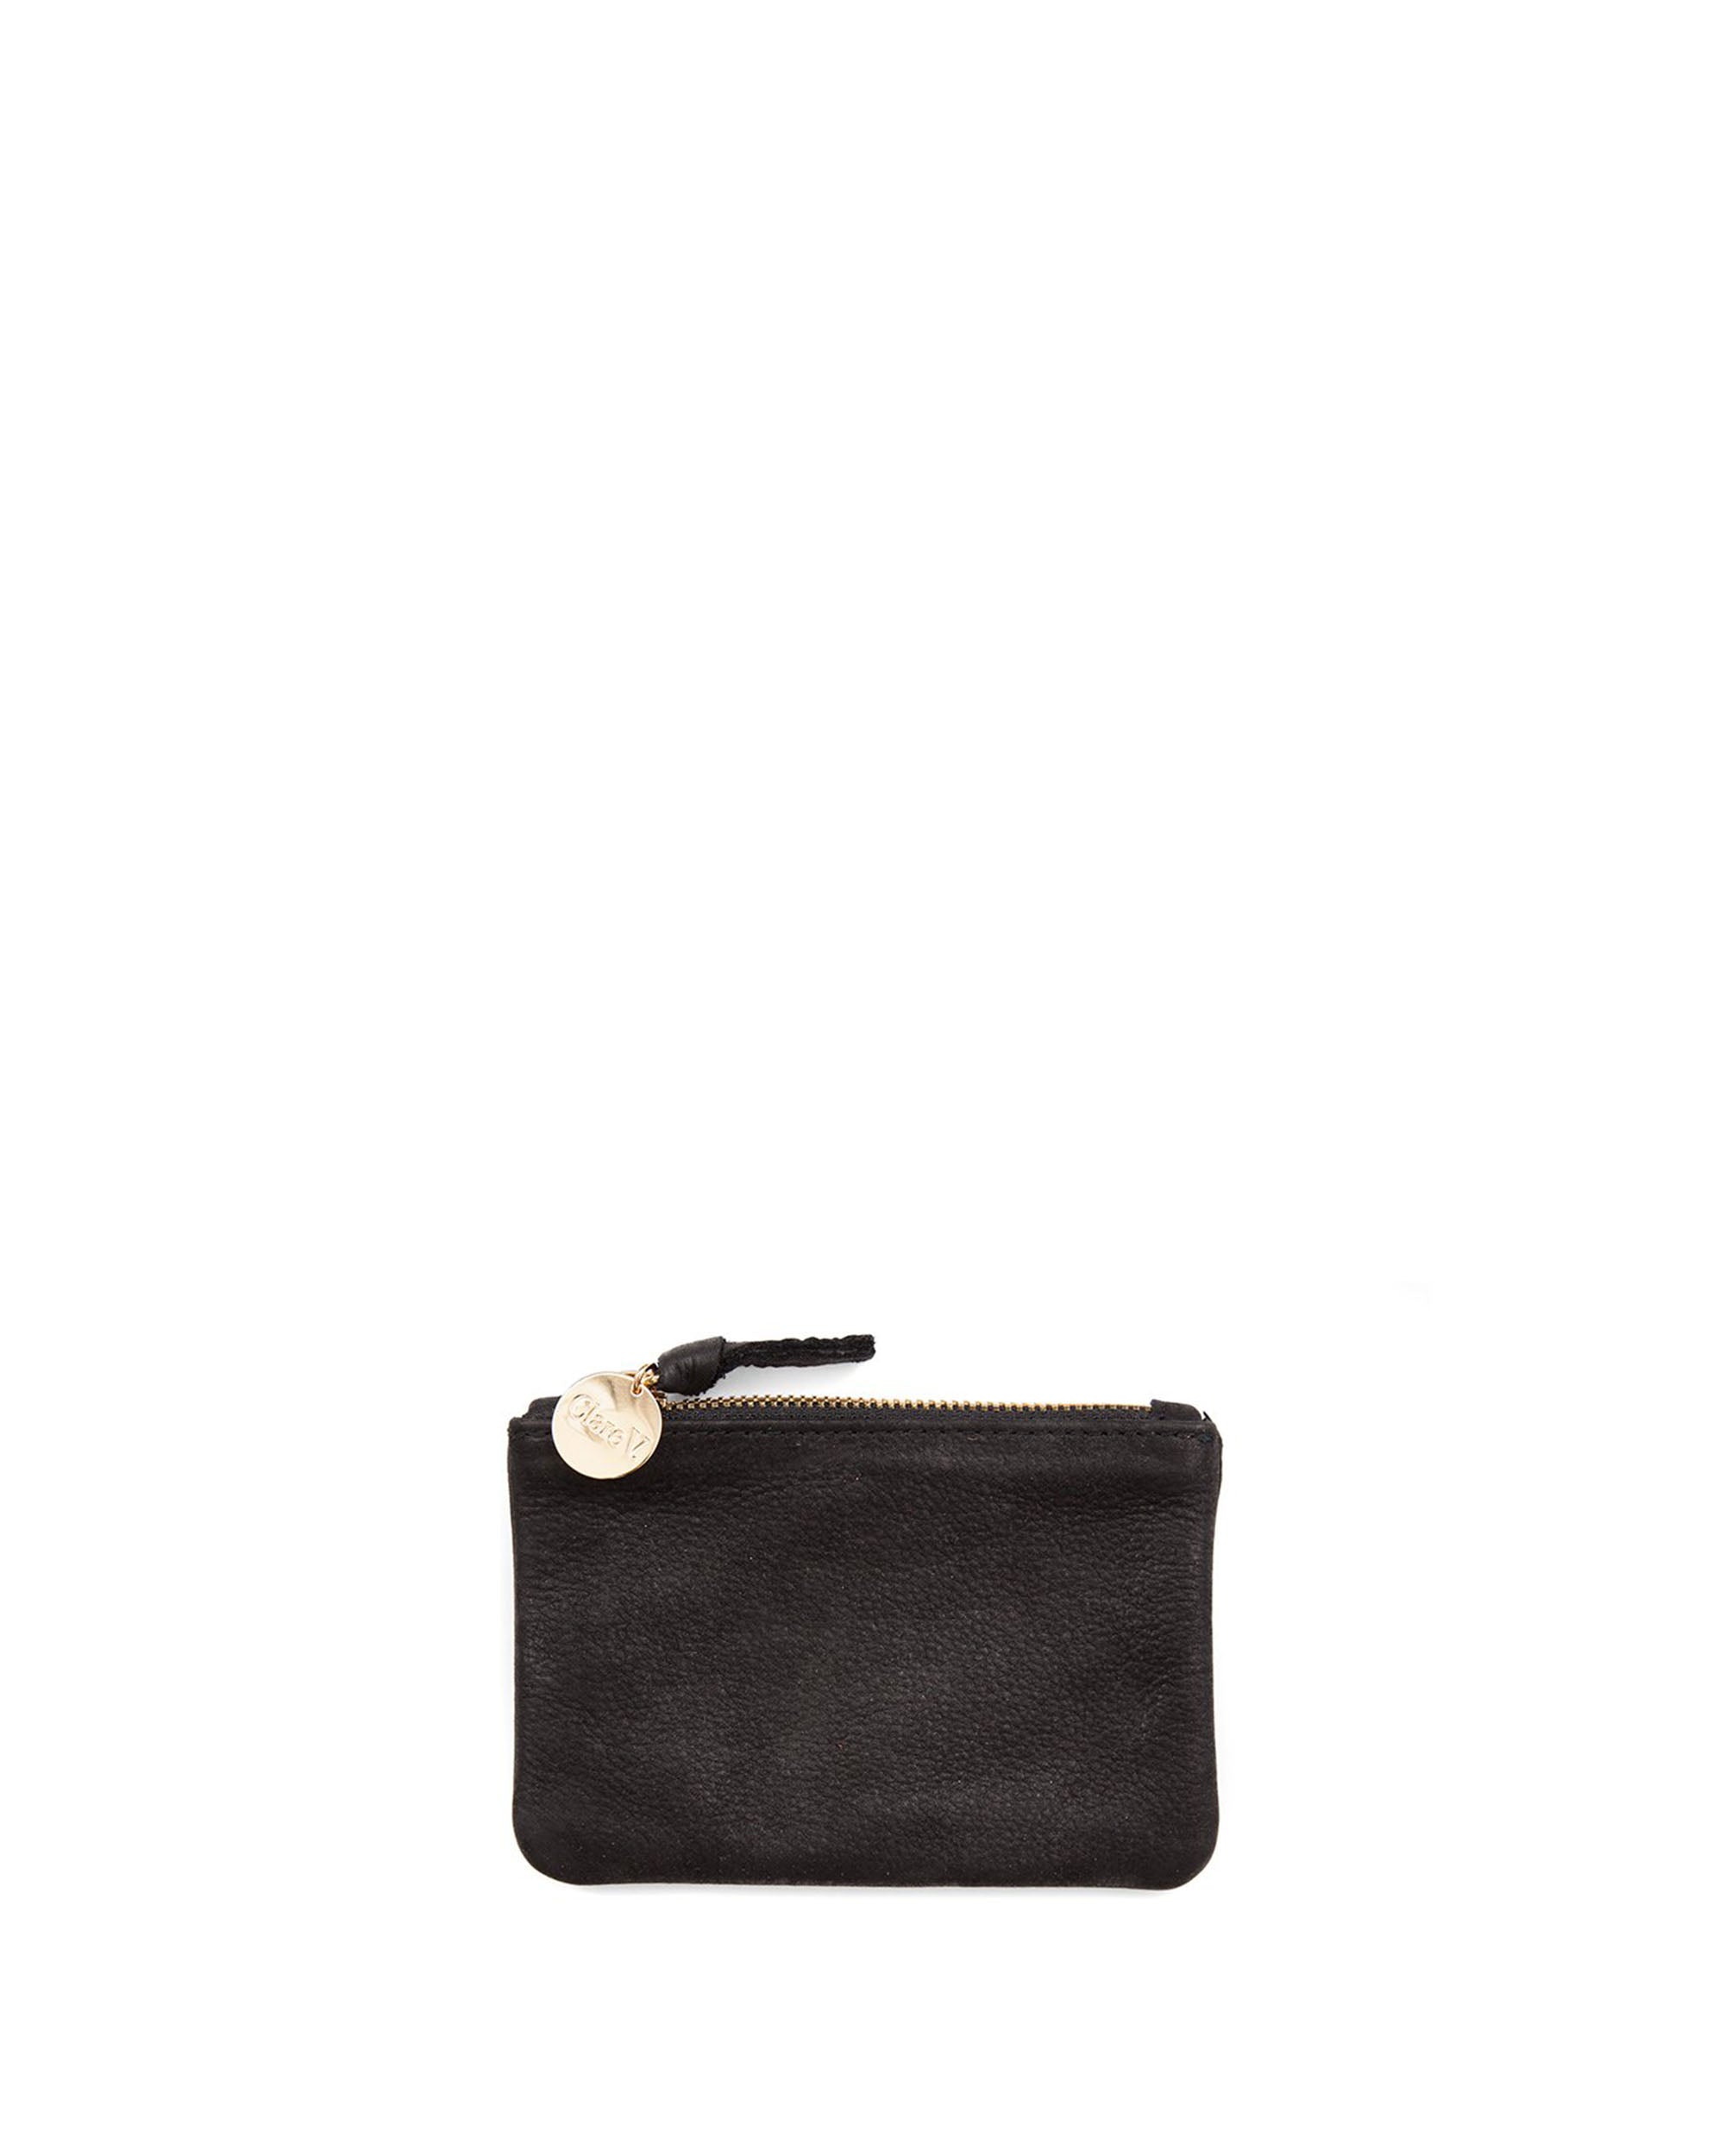 Clare V Black Pebbled Leather Top Zipper Gold Hardware Clutch